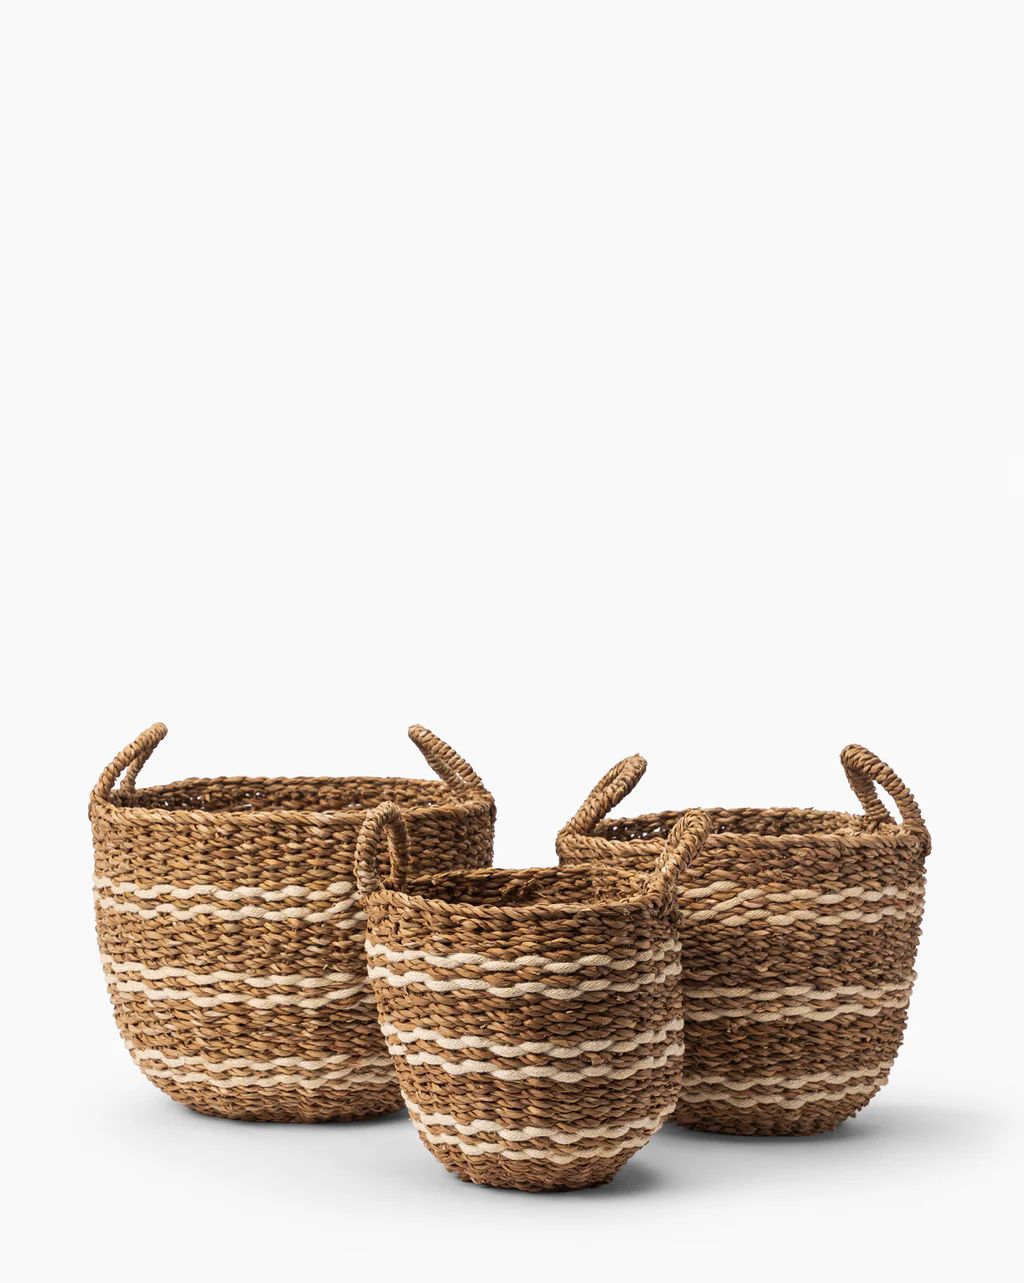 Striped Seagrass Basket | McGee & Co.